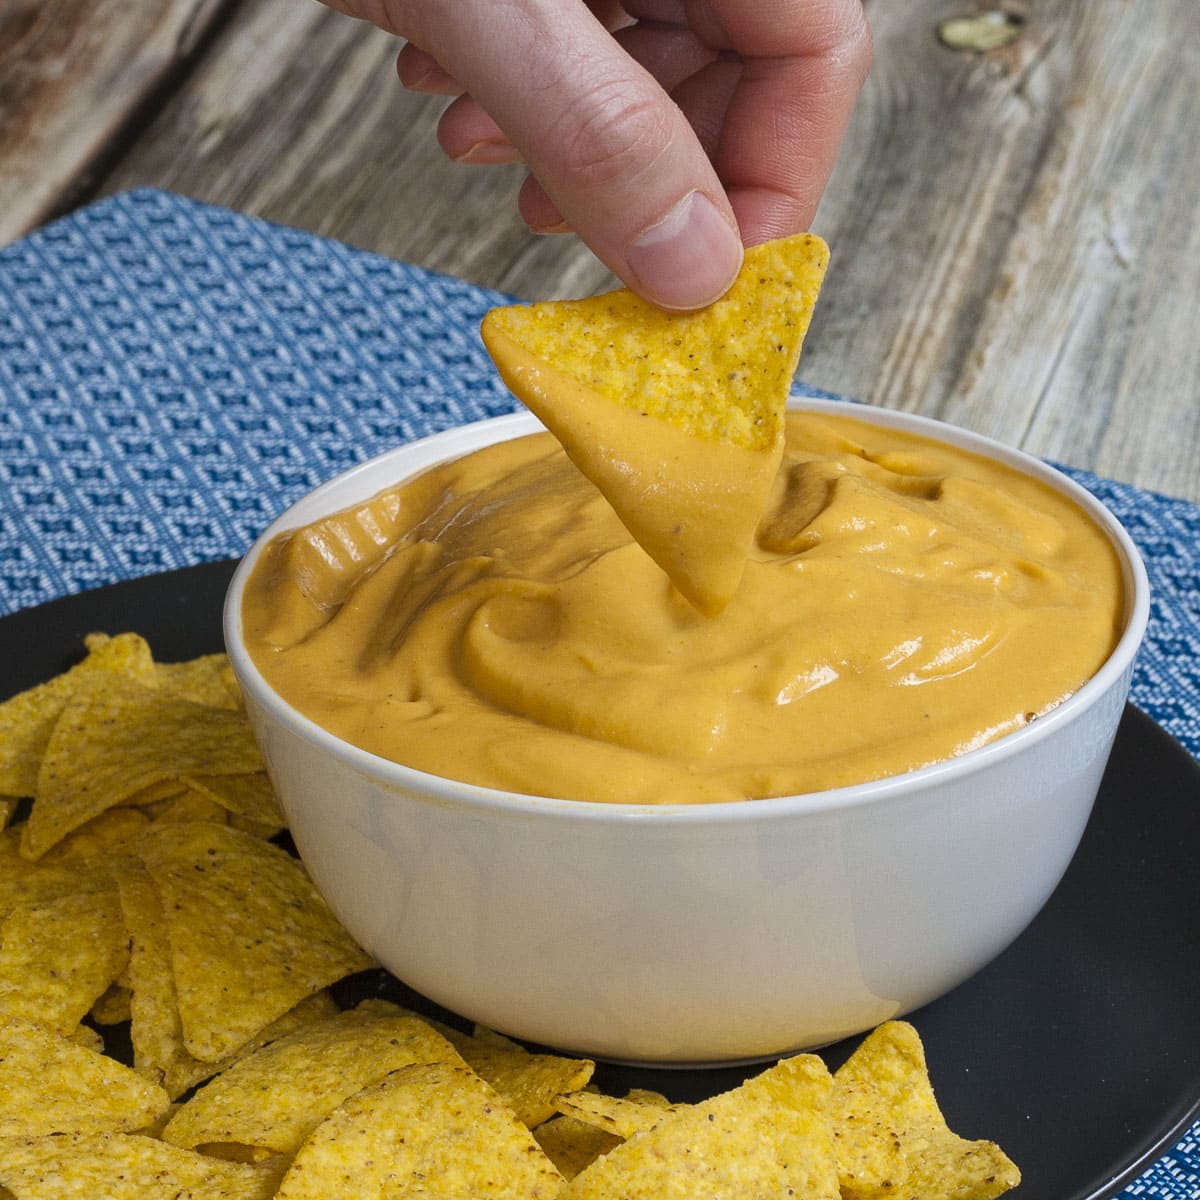 White bowl of vegan nacho cheese sauce and a hand dips a tortilla in it